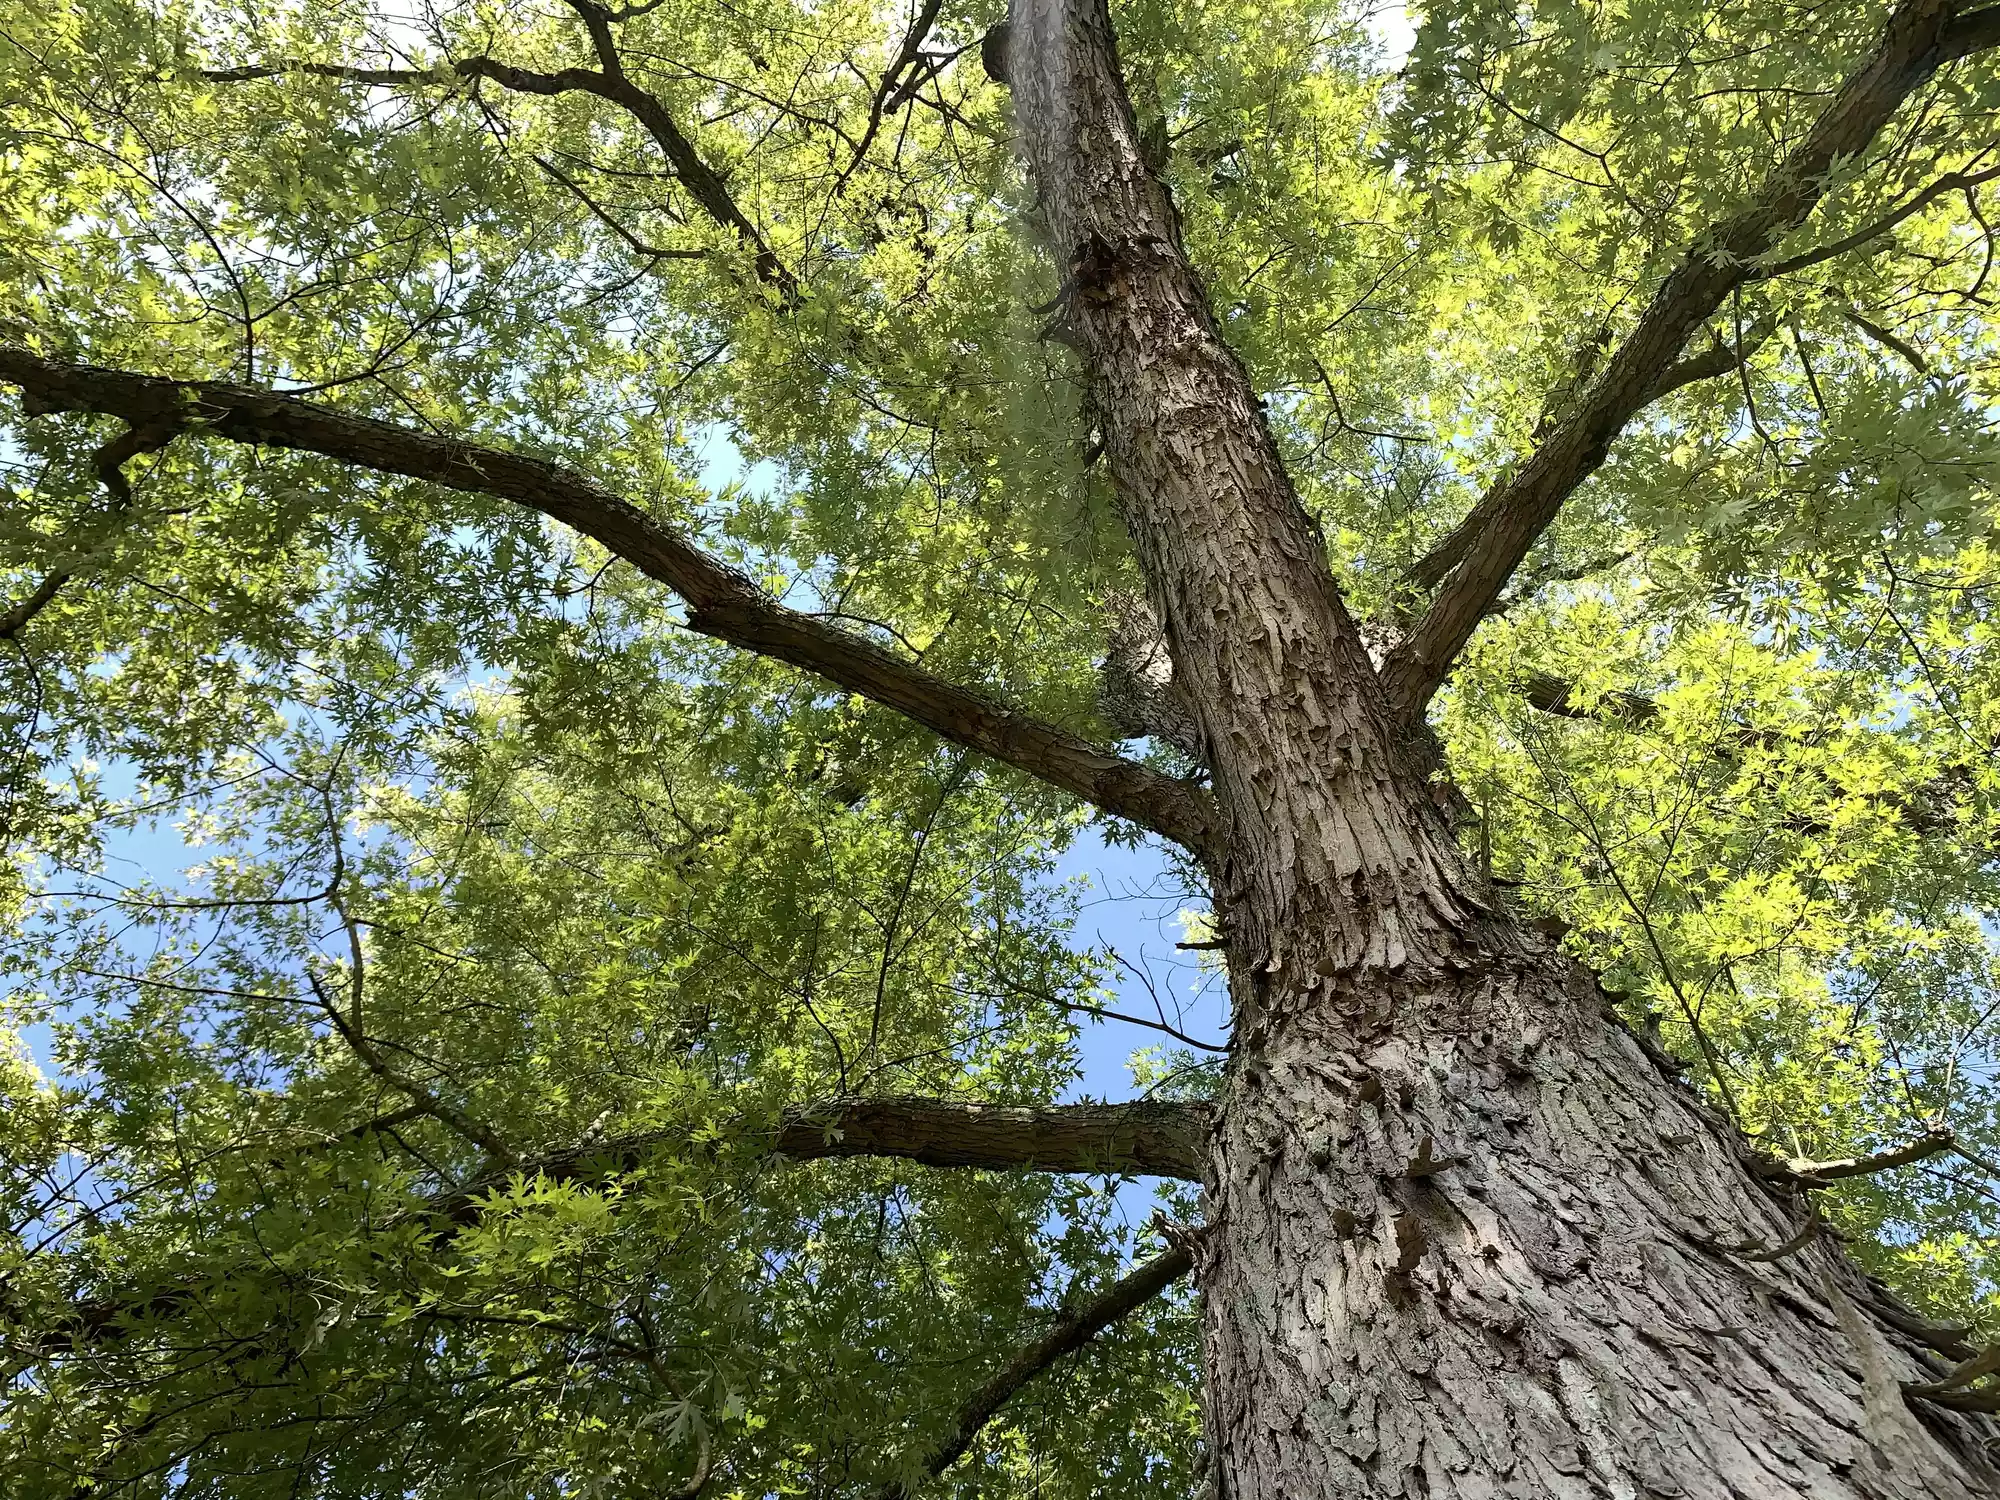 View of trunk and canopy of silver maple tree from below